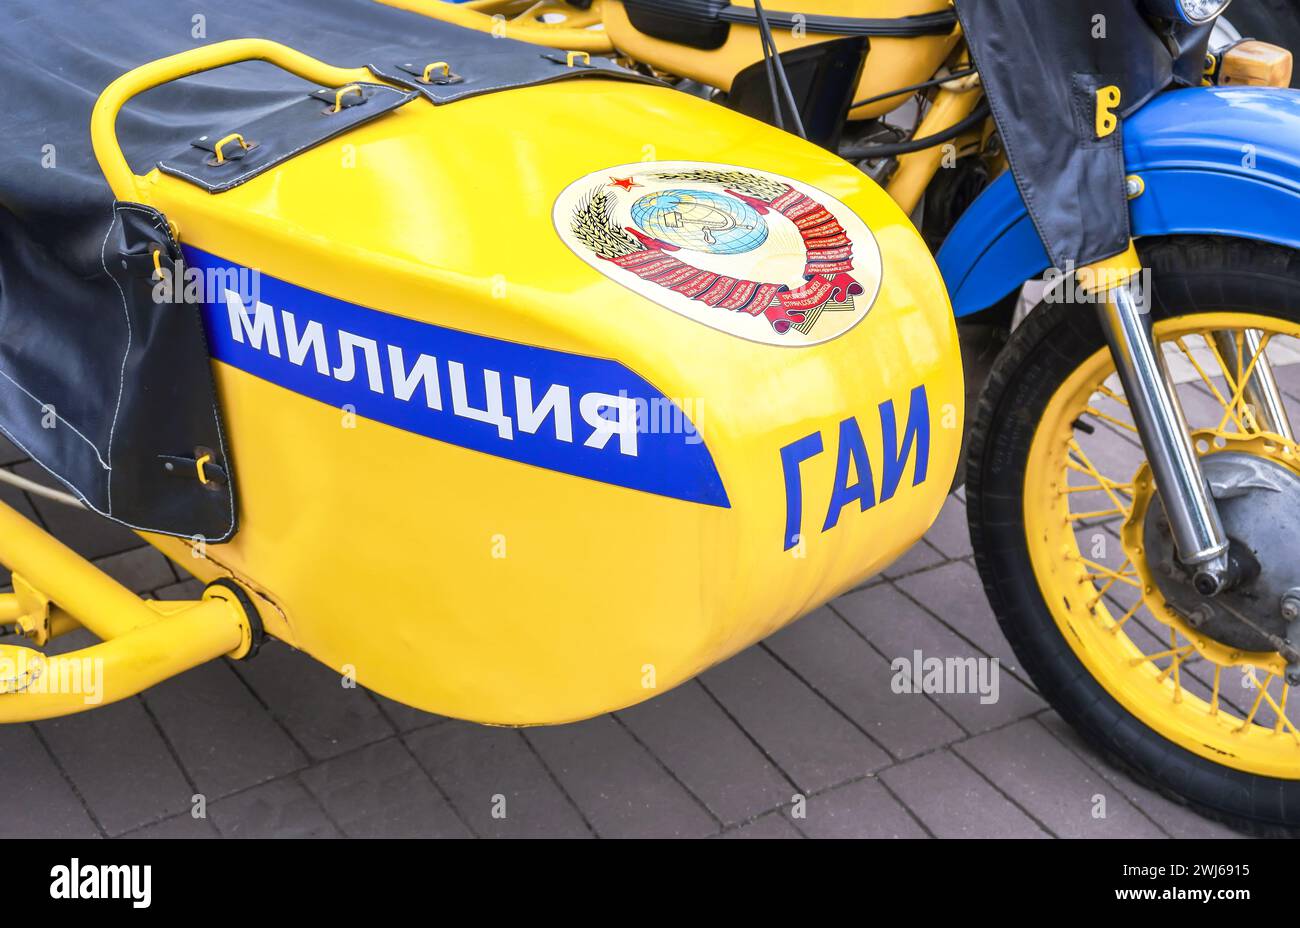 nscription "Militsia" (Police) and emblem of the former soviet union on the board of russian police motorcycle. State Automobile Inspectorate Stock Photo